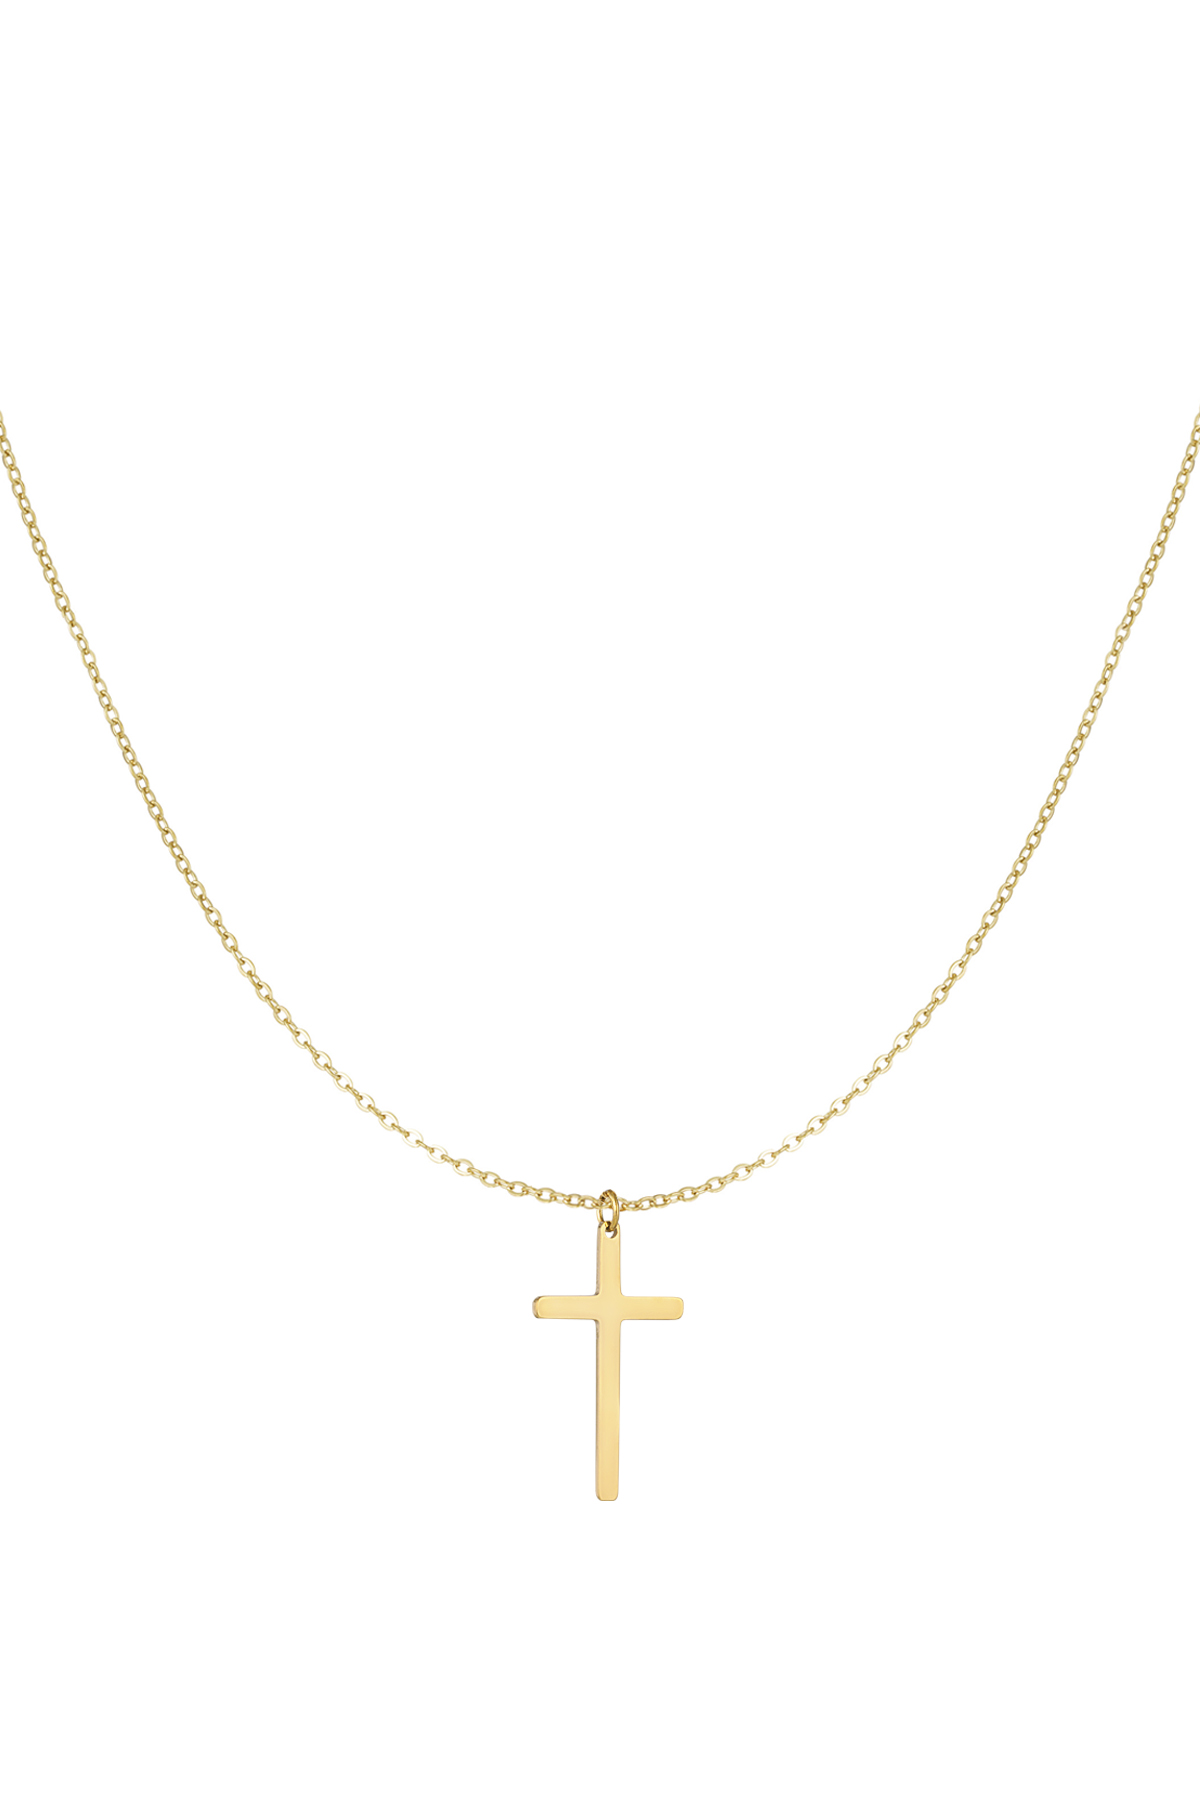 Necklace cross charm - gold 